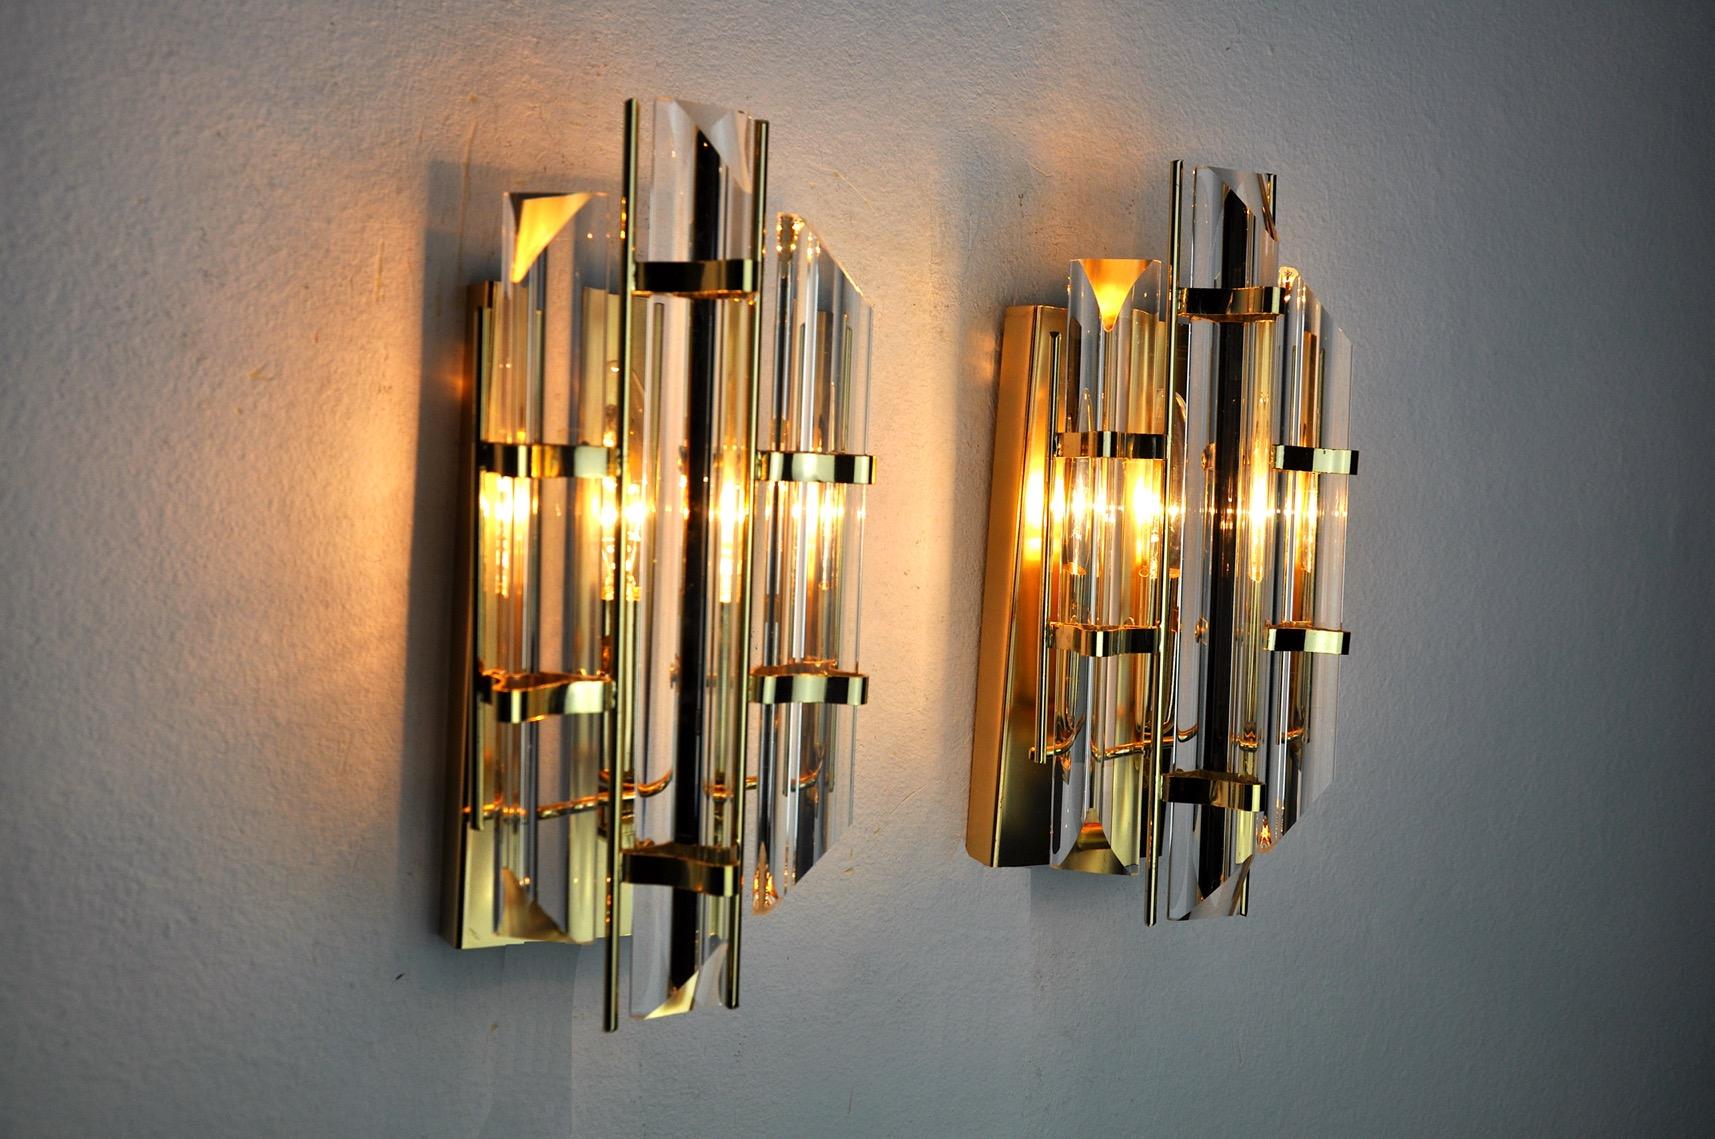 Pair of Venini Wall Lamps, Cut Glass, Murano, Italy, 1970 For Sale 1